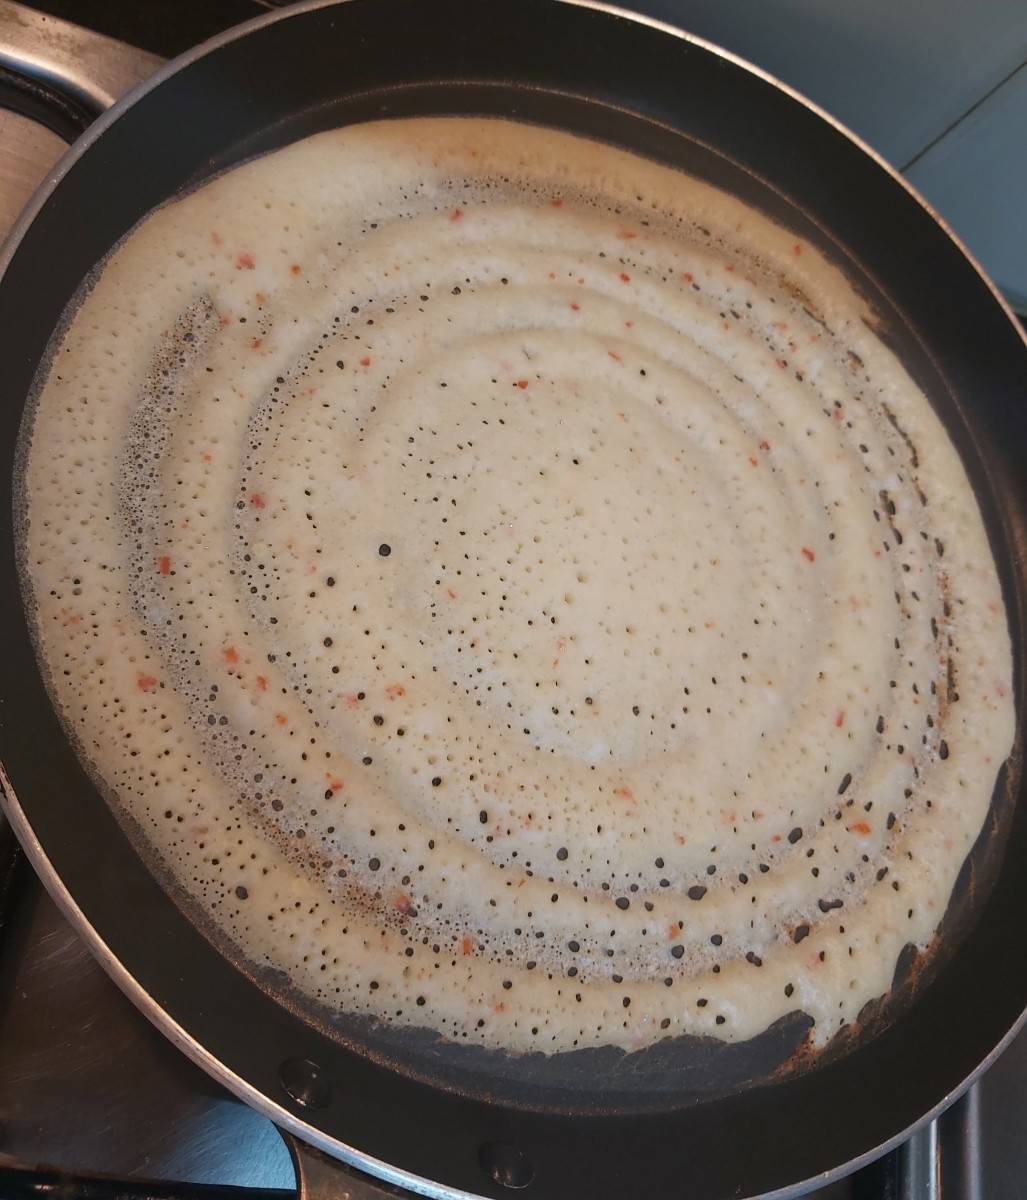 Cover the dosa and cook on medium flame till top of dosa is cooked completely. You can roast it if you want.